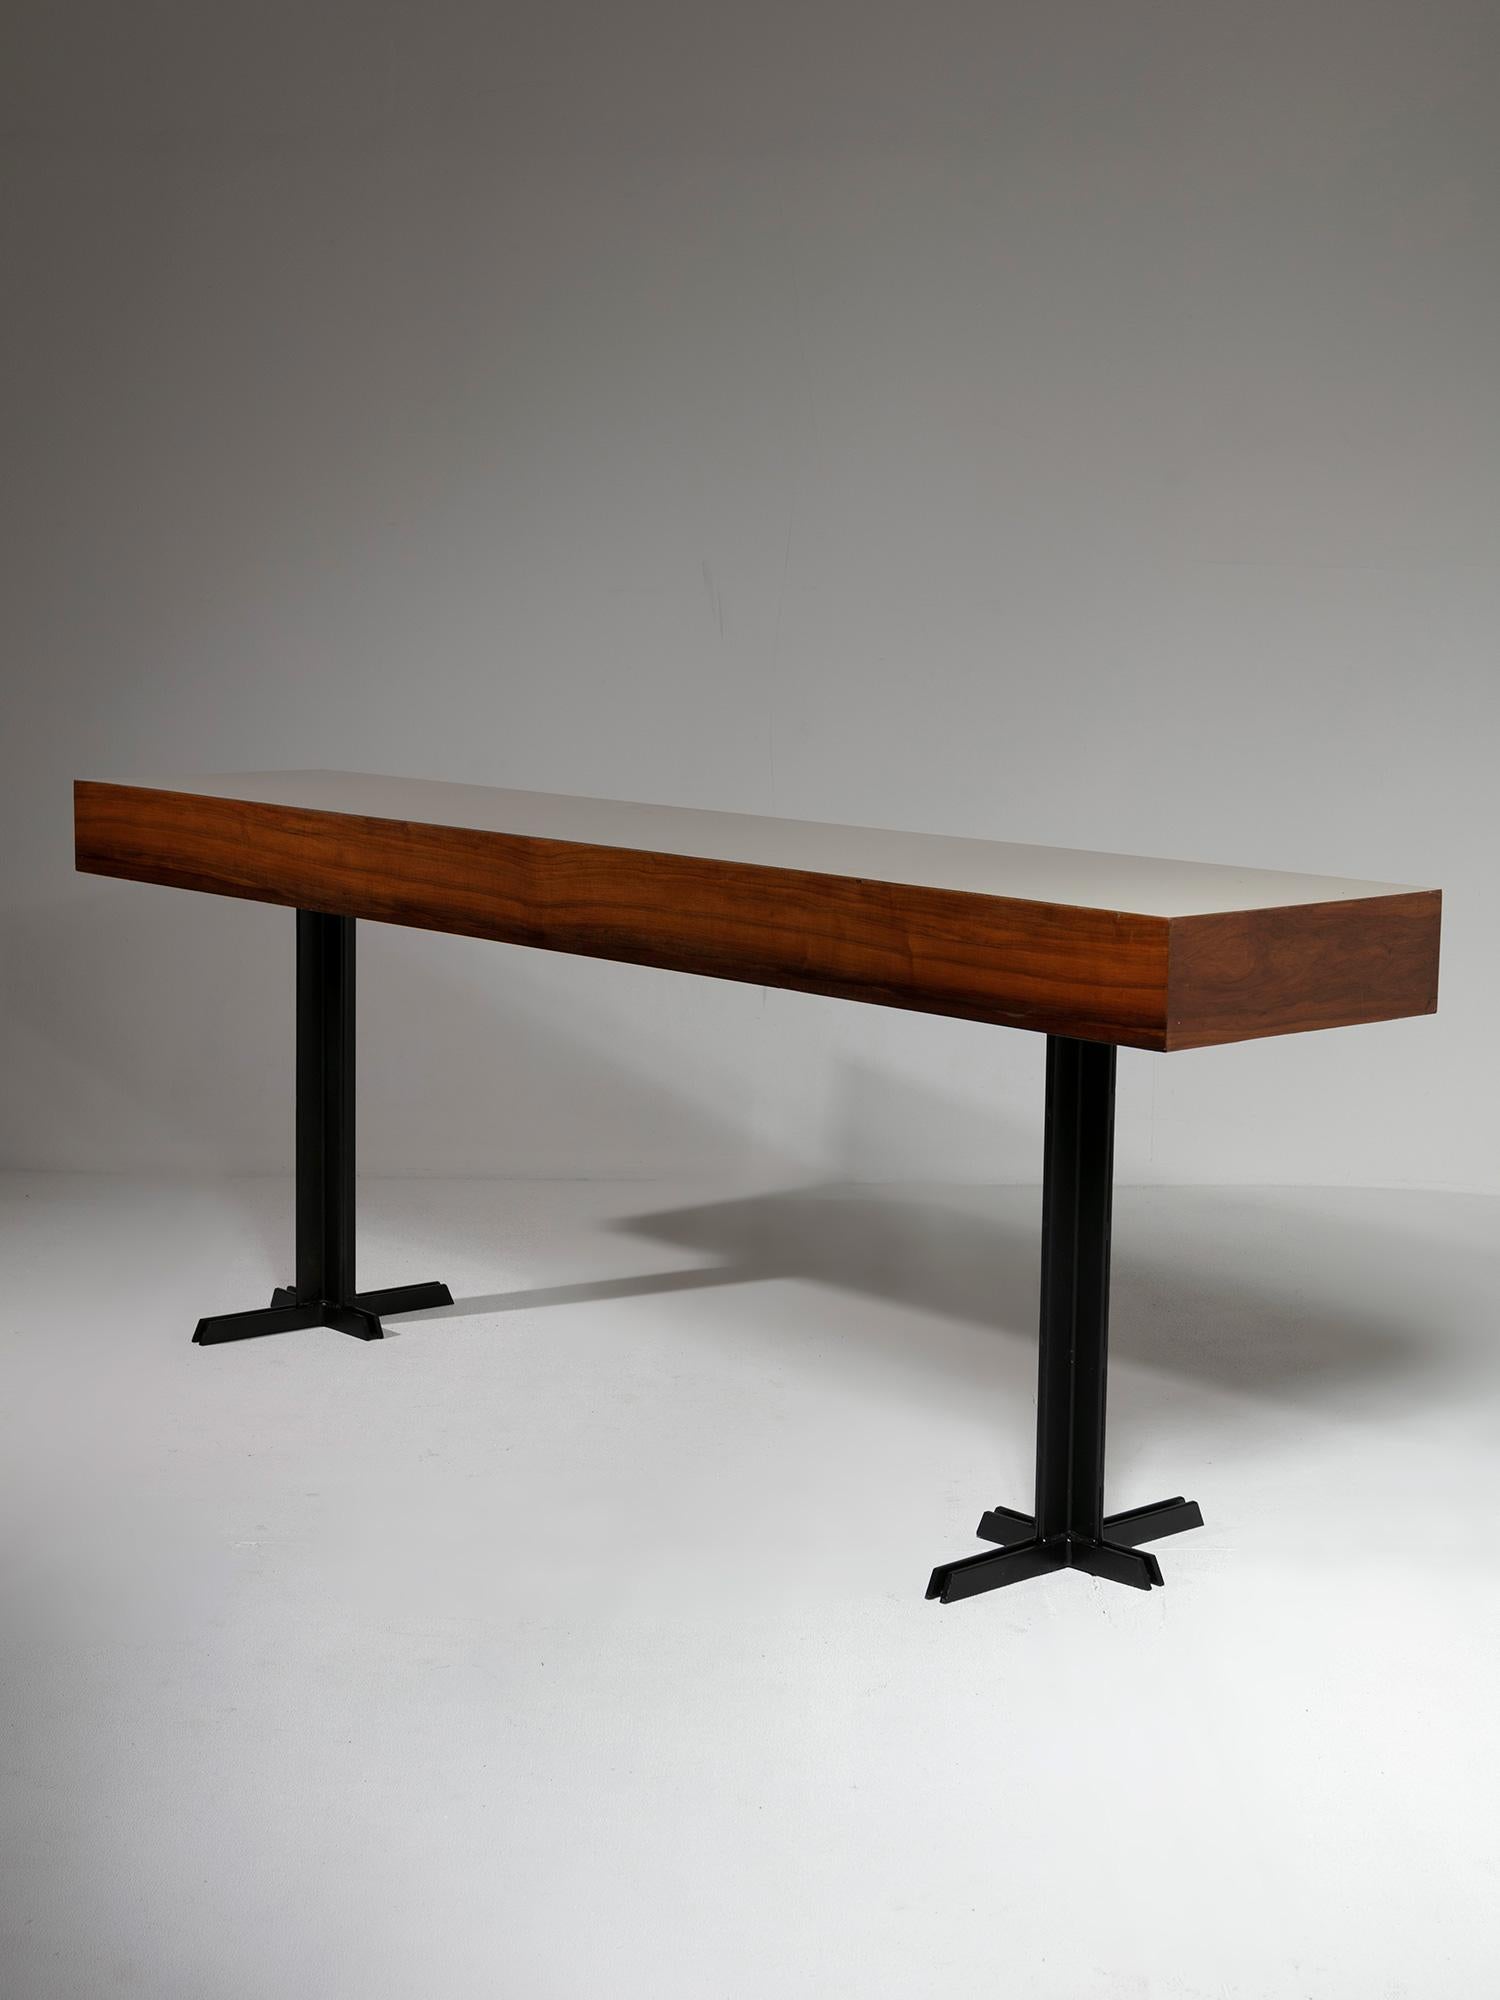 Large 50s console with black metal legs supporting a thick wood element with formica top.